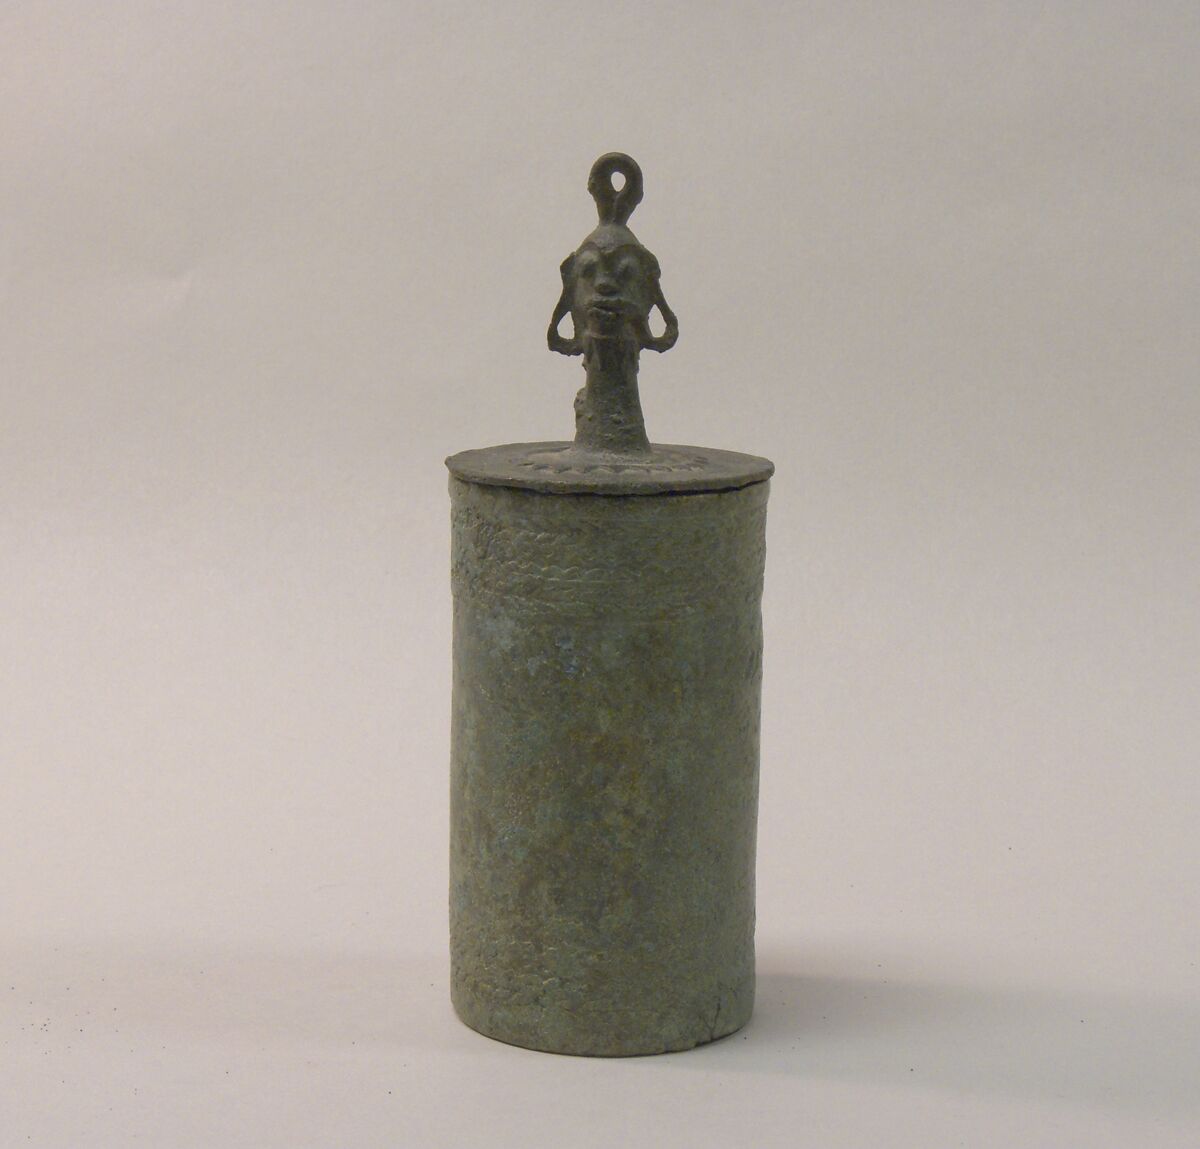 Lid of a Lime Container with Head, Bronze, Indonesia (Java, Lumajang, Pasiran) 